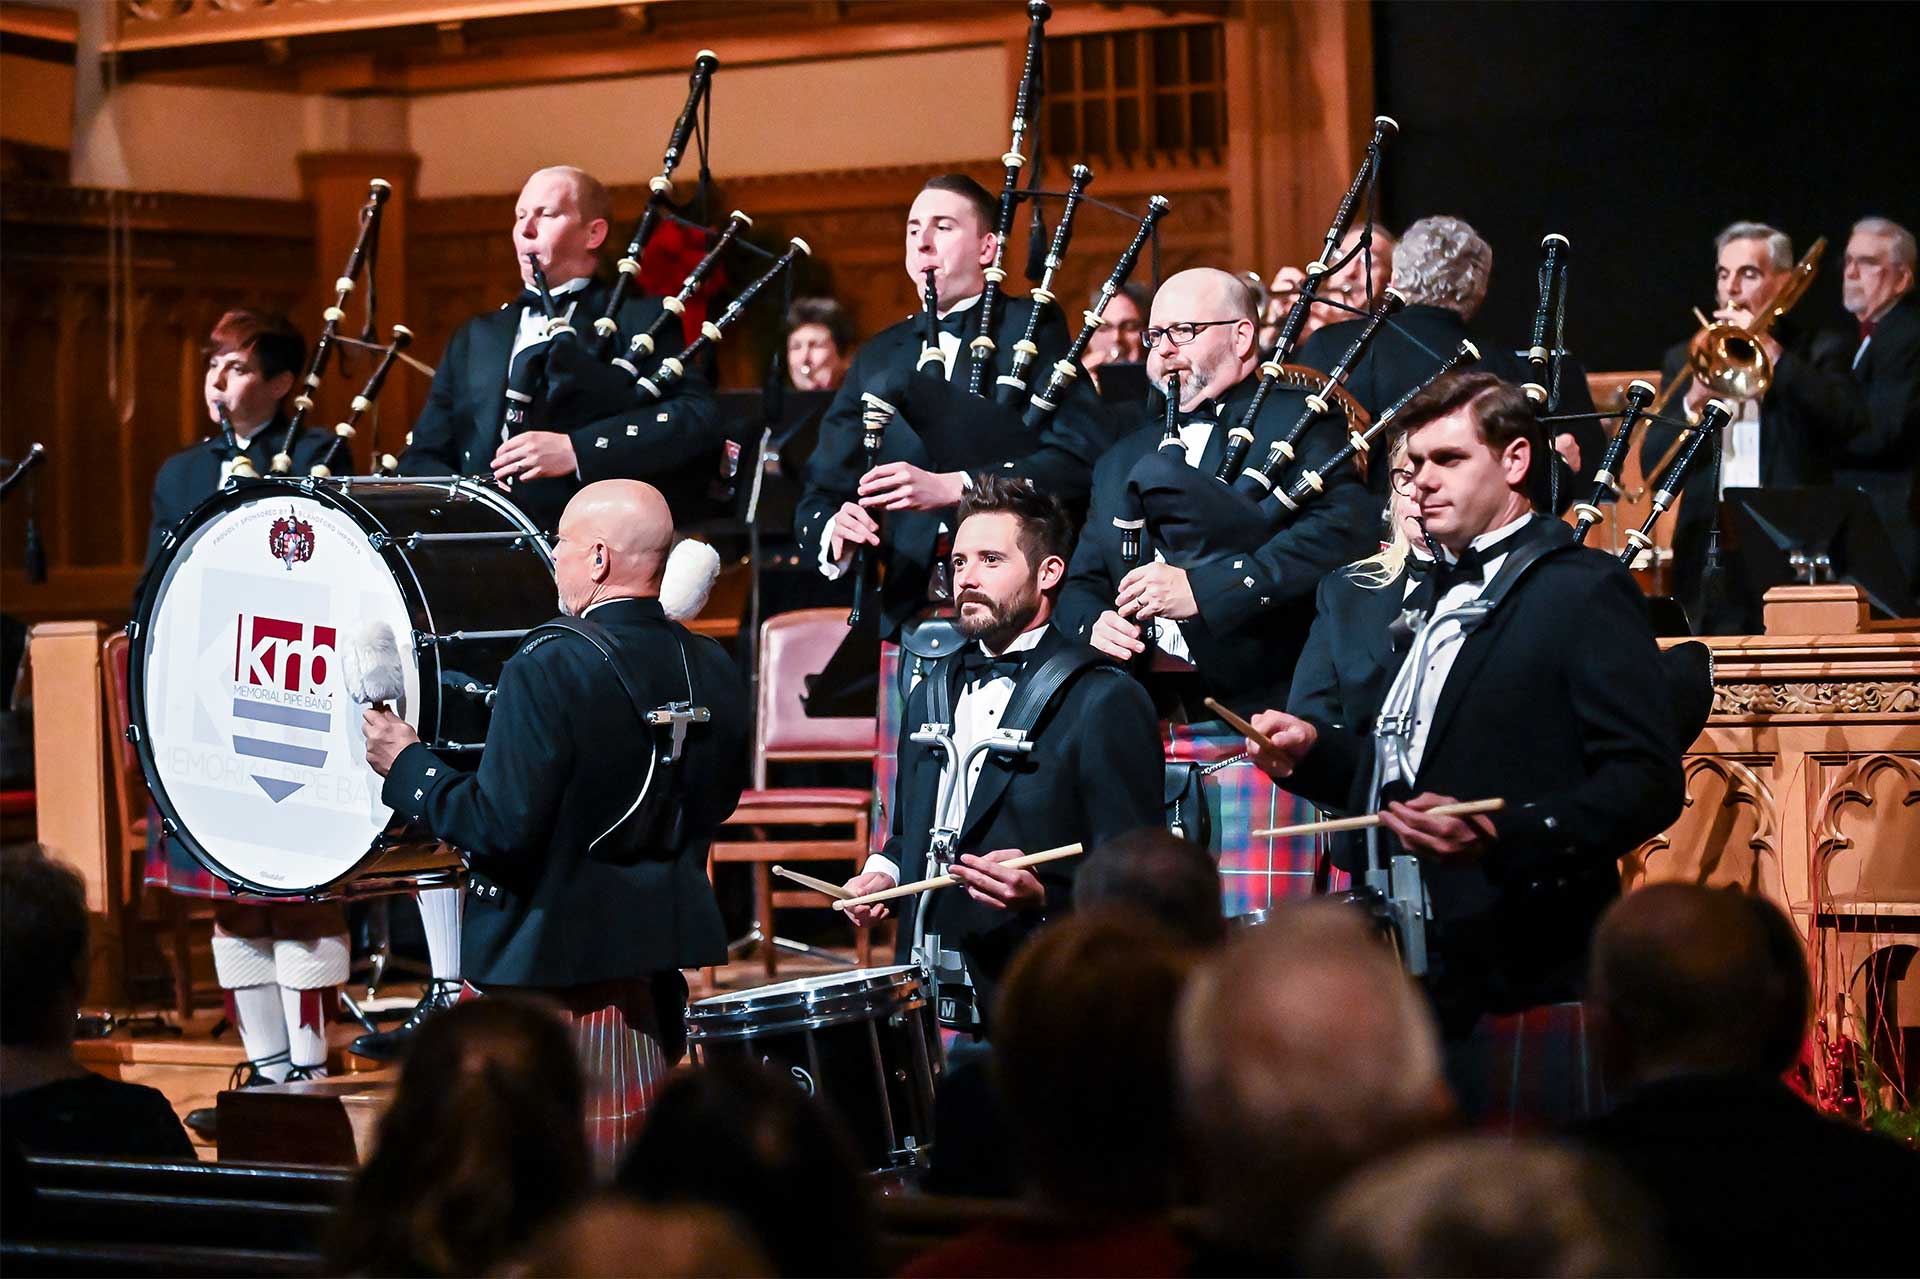 Oct. 25, 2019 – Tickets Now on Sale for 21st Annual Pipes of Christmas